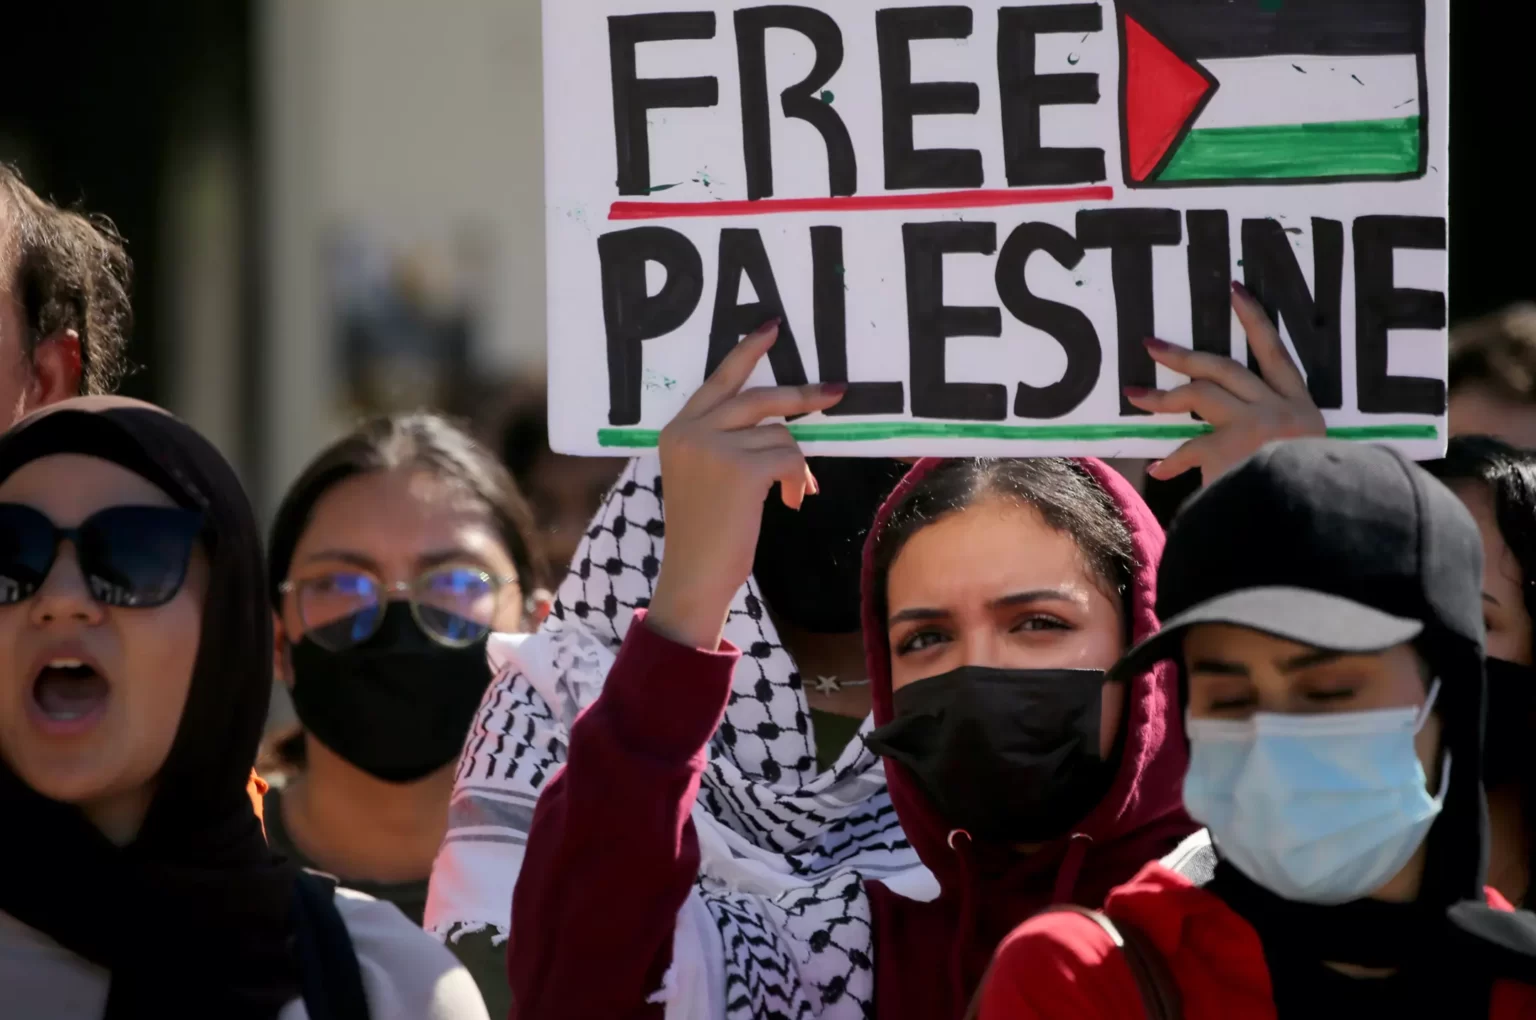 Harvard and Columbia Students Lose Jobs After Supporting Palestine in Online Letter